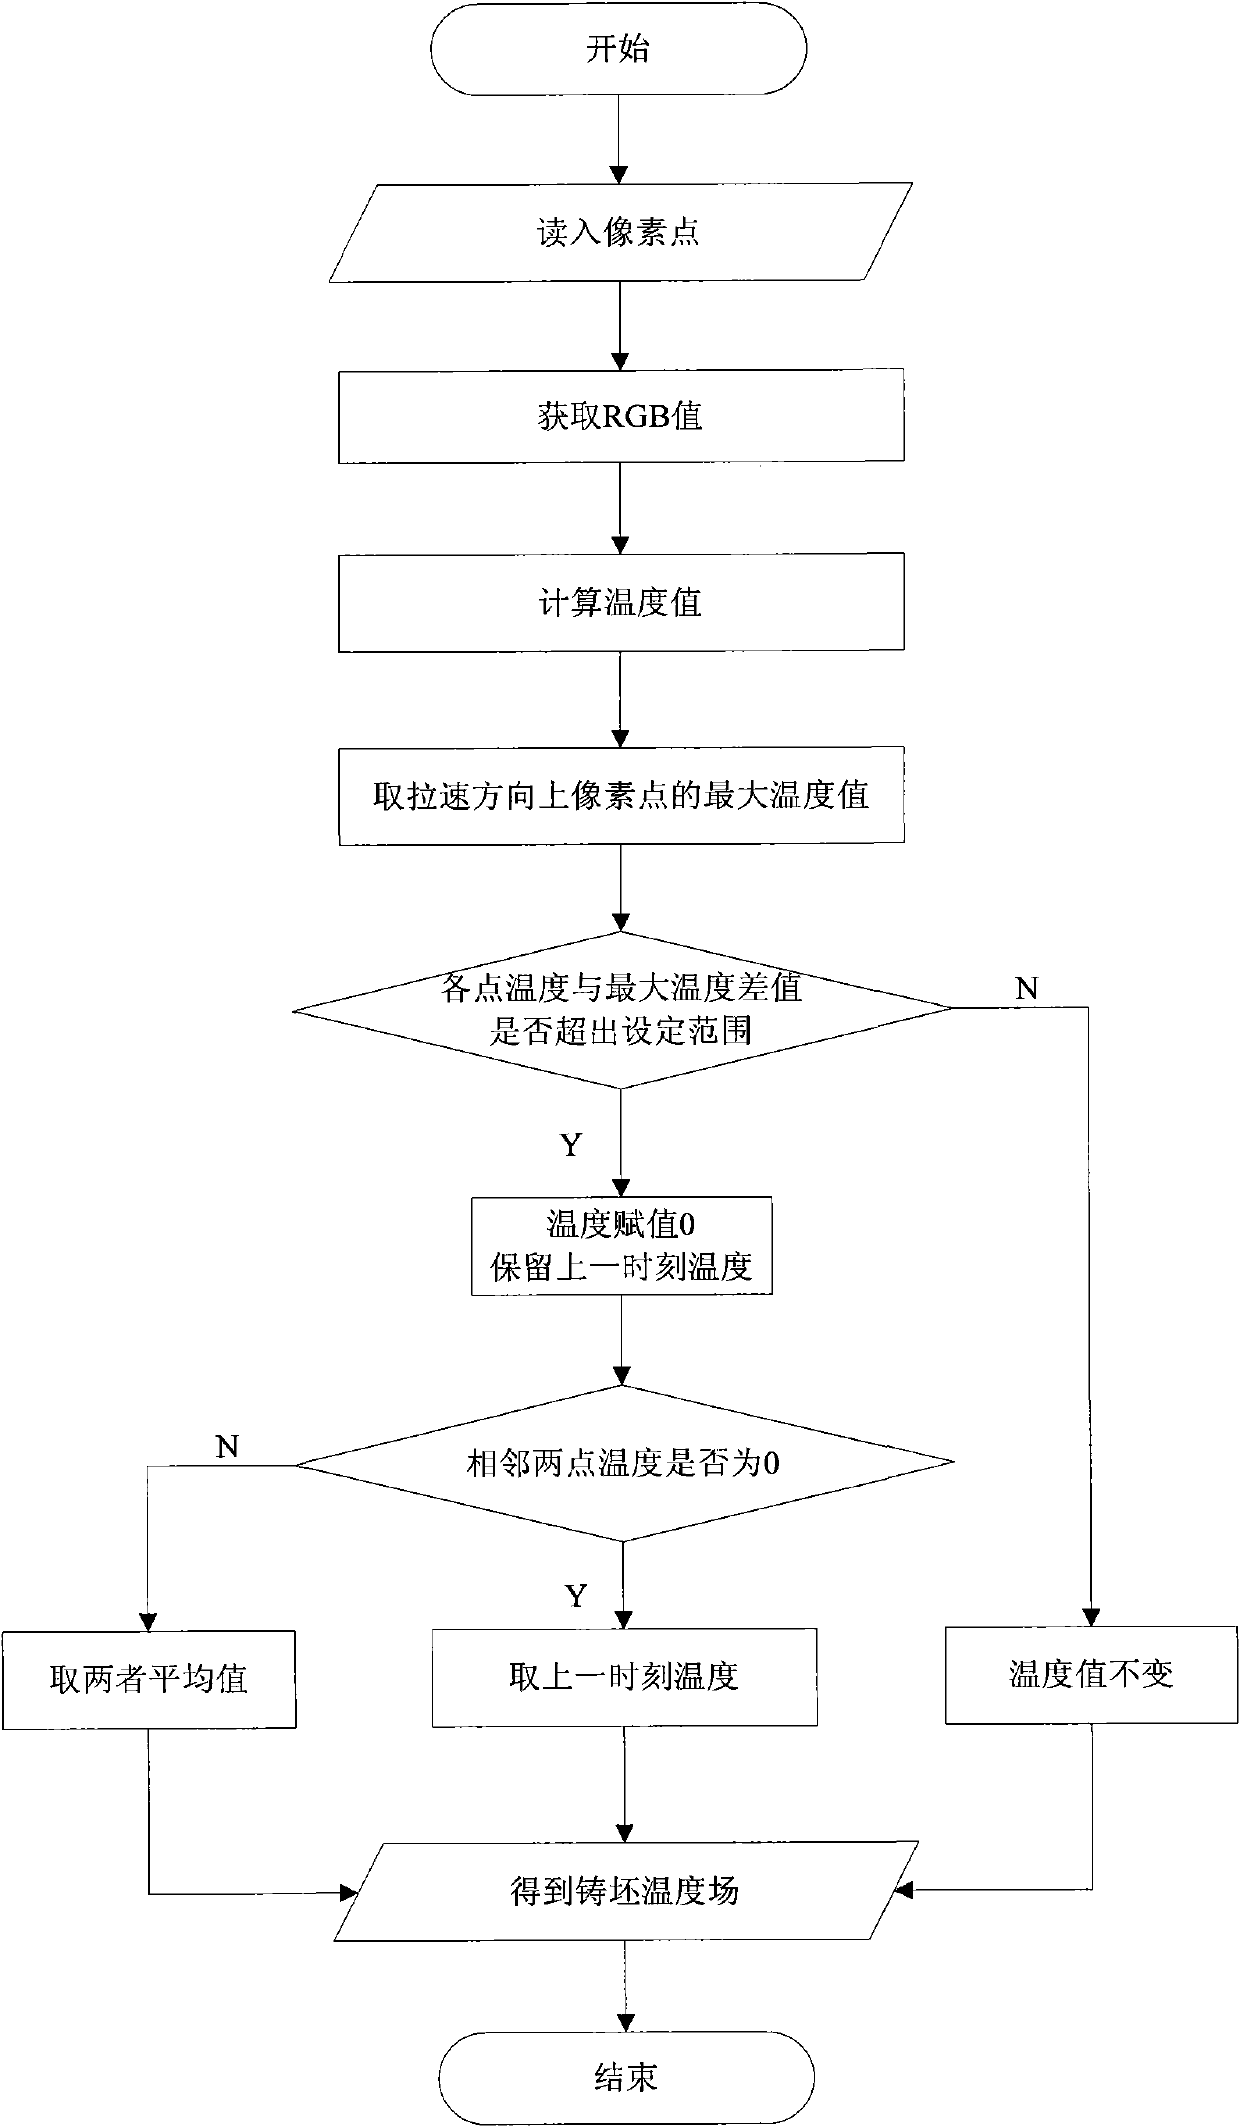 High-temperature slab imaging temperature detecting system in secondary cooling zone of continuous casting machine and temperature detecting method thereof